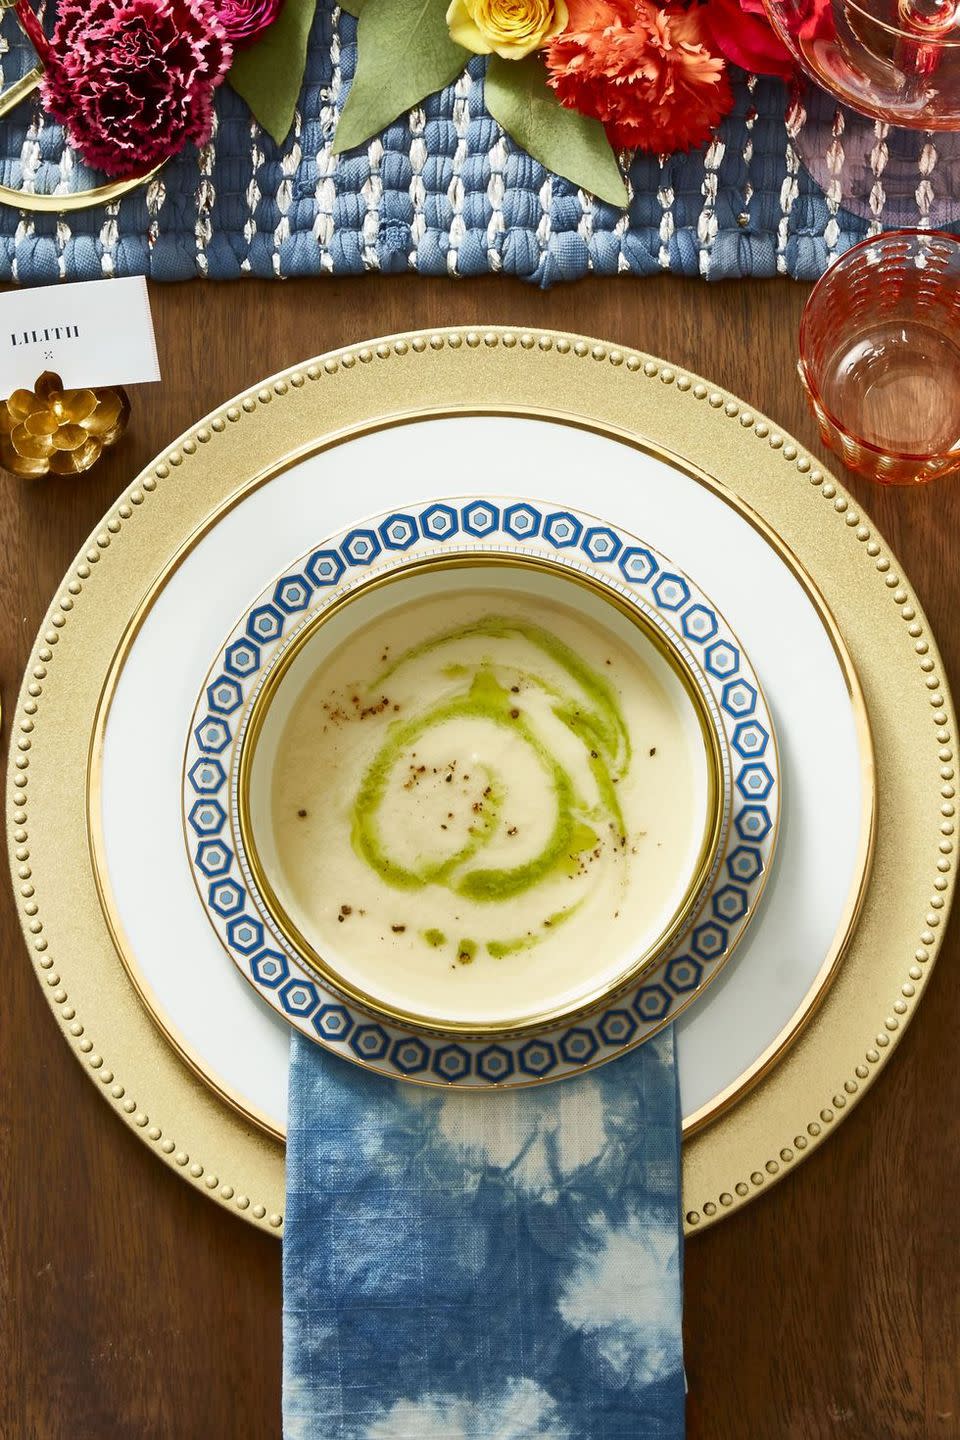 <p>If you're looking for a quick and cozy appetizer, start Christmas dinner with a veggie-loaded soup.</p><p><a href="https://www.goodhousekeeping.com/food-recipes/easy/a46630/20-minute-cauliflower-soup-recipe/" rel="nofollow noopener" target="_blank" data-ylk="slk:Get the recipe »" class="link "><em>Get the <em>recipe</em> »</em></a><br></p><p><strong>RELATED:</strong> <a href="https://www.goodhousekeeping.com/food-recipes/easy/g921/easy-winter-soups/" rel="nofollow noopener" target="_blank" data-ylk="slk:10 Simple Soups for the Chilliest Days" class="link ">10 Simple Soups for the Chilliest Days</a></p>